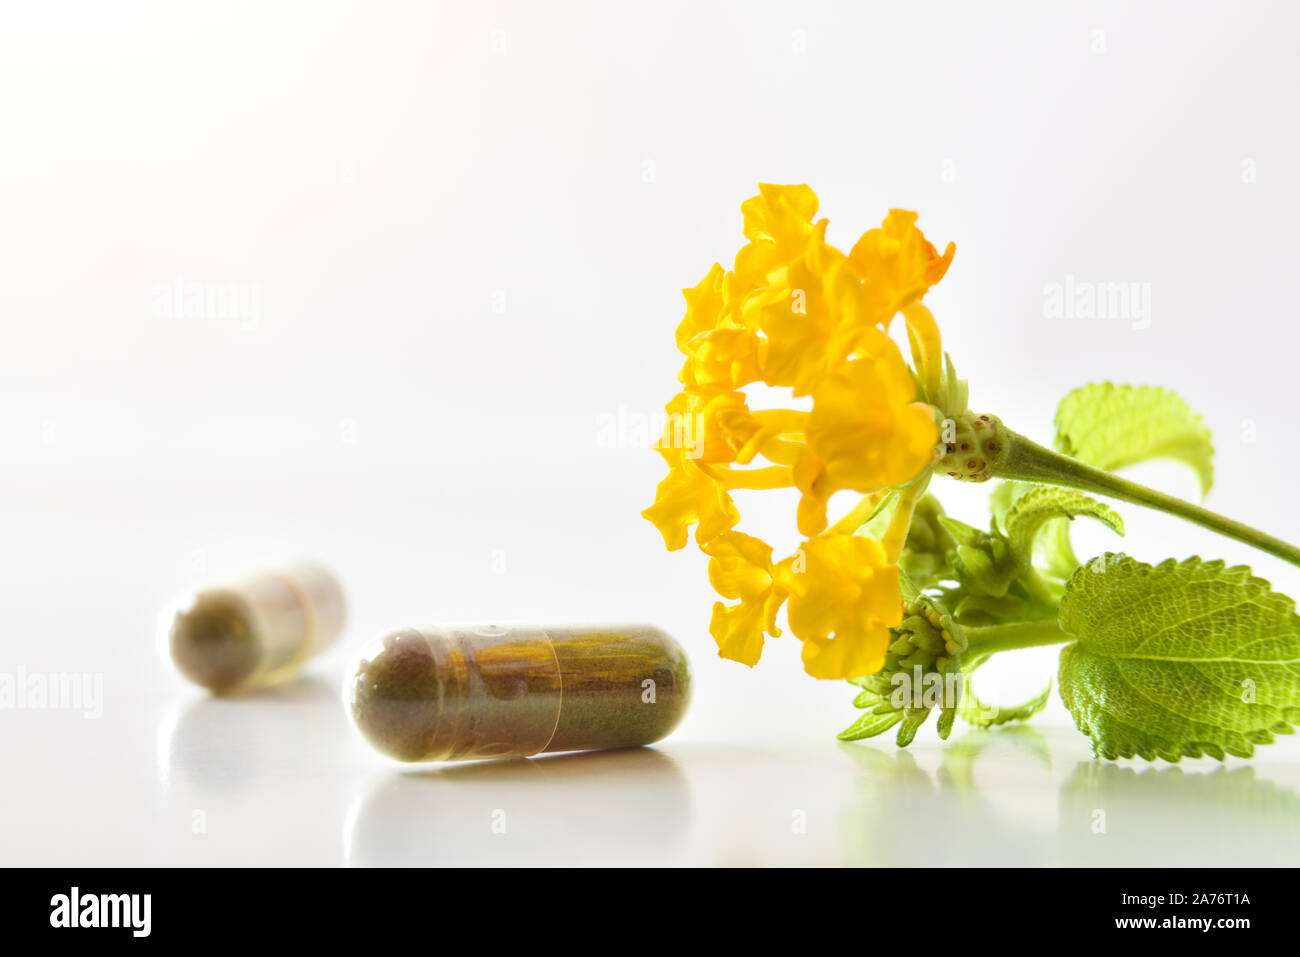 Natural medicine capsules and plant with flowers on white table isolated white. Natural medicine concept. Front view. Horizontal composition. Stock Photo